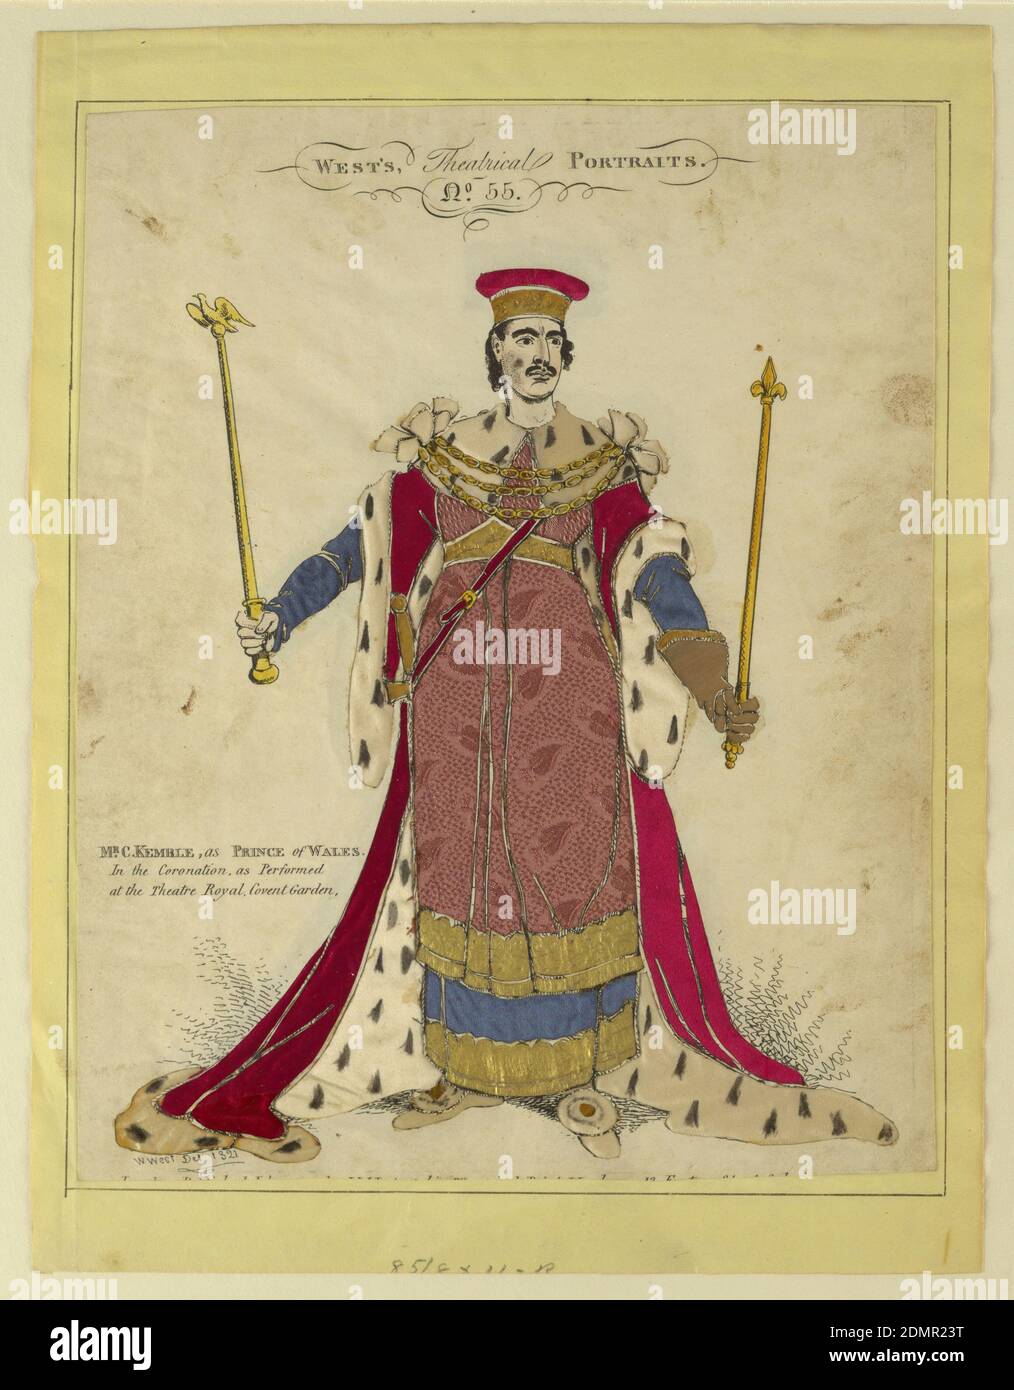 Charles Kemble as the Prince of Wales, W. West, Engraving, embossed foil, fabric, Vertical rectangle. The full-length portrait of a man, facing the spectator. He is dressed in full ceremonial robes, and carries the symbols of his rank in his hand. Thoses areas, including the costume, have been cut out and replaced by tinsel and silk., England, 1821, theater, Tinsel picture, Tinsel picture Stock Photo